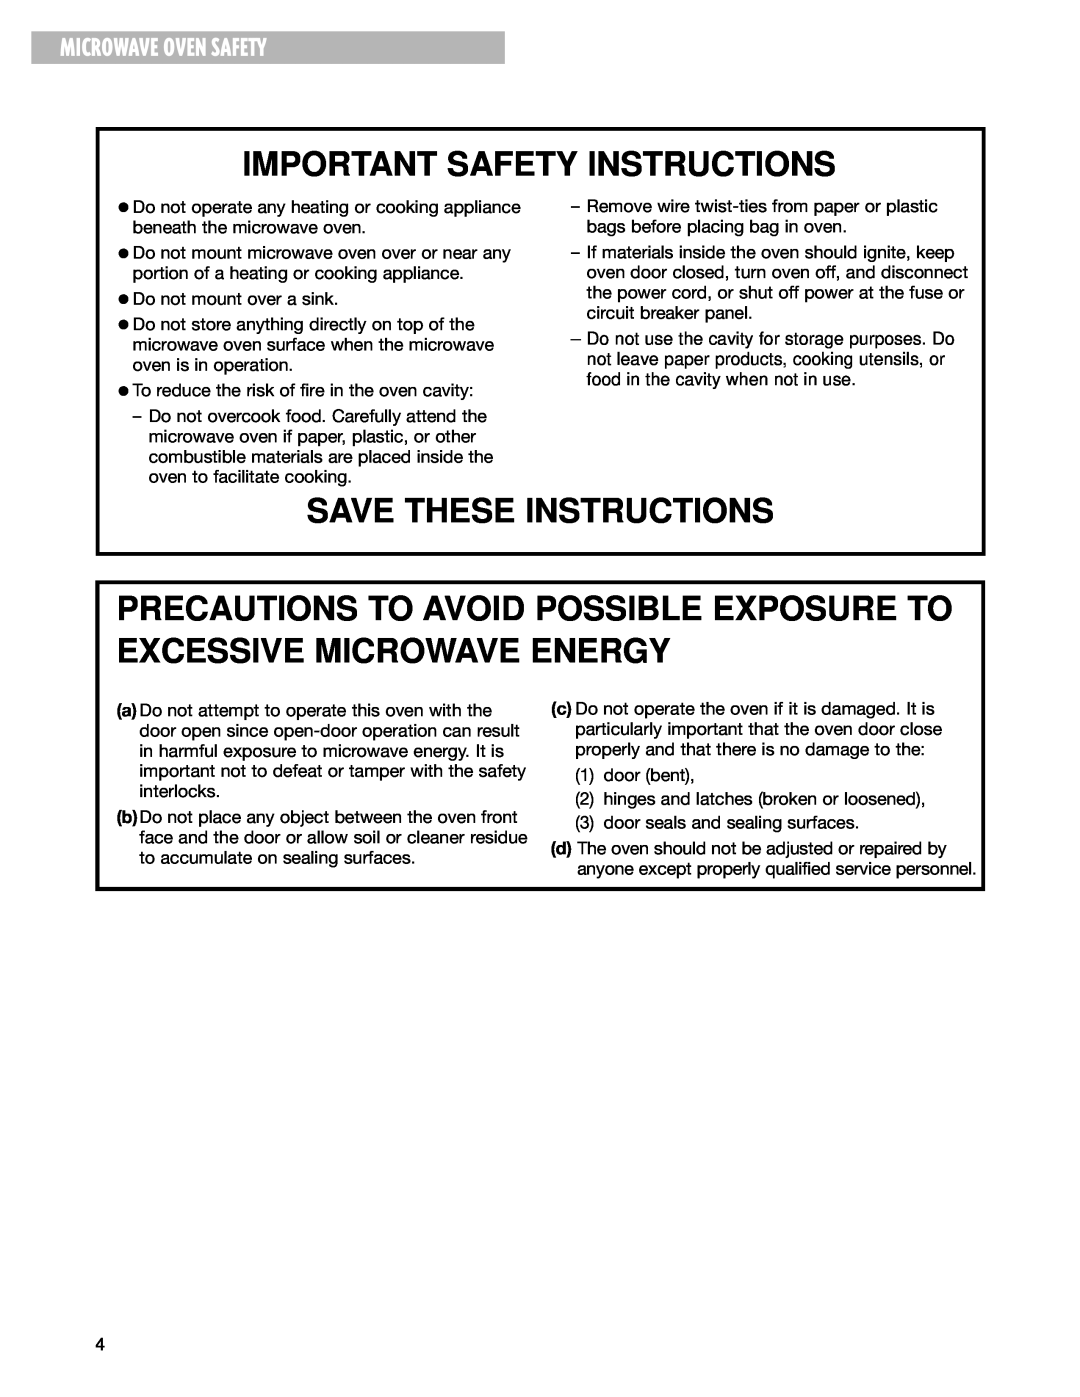 Whirlpool MT4070SK, MT4078SK Microwave Oven Safety, Important Safety Instructions, Save These Instructions 